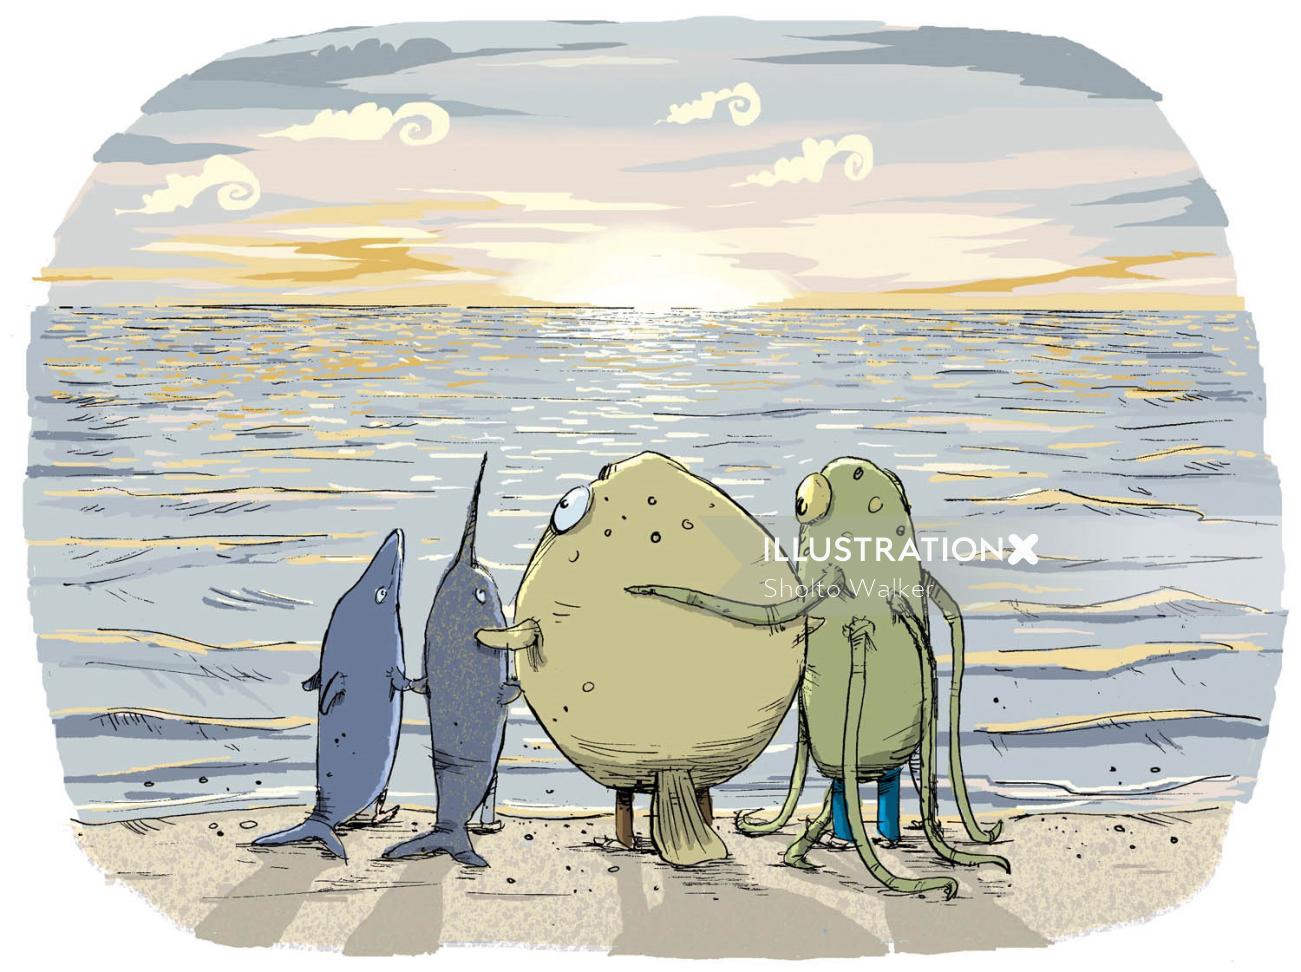 Cartoon & Humour Family stare out to sea
